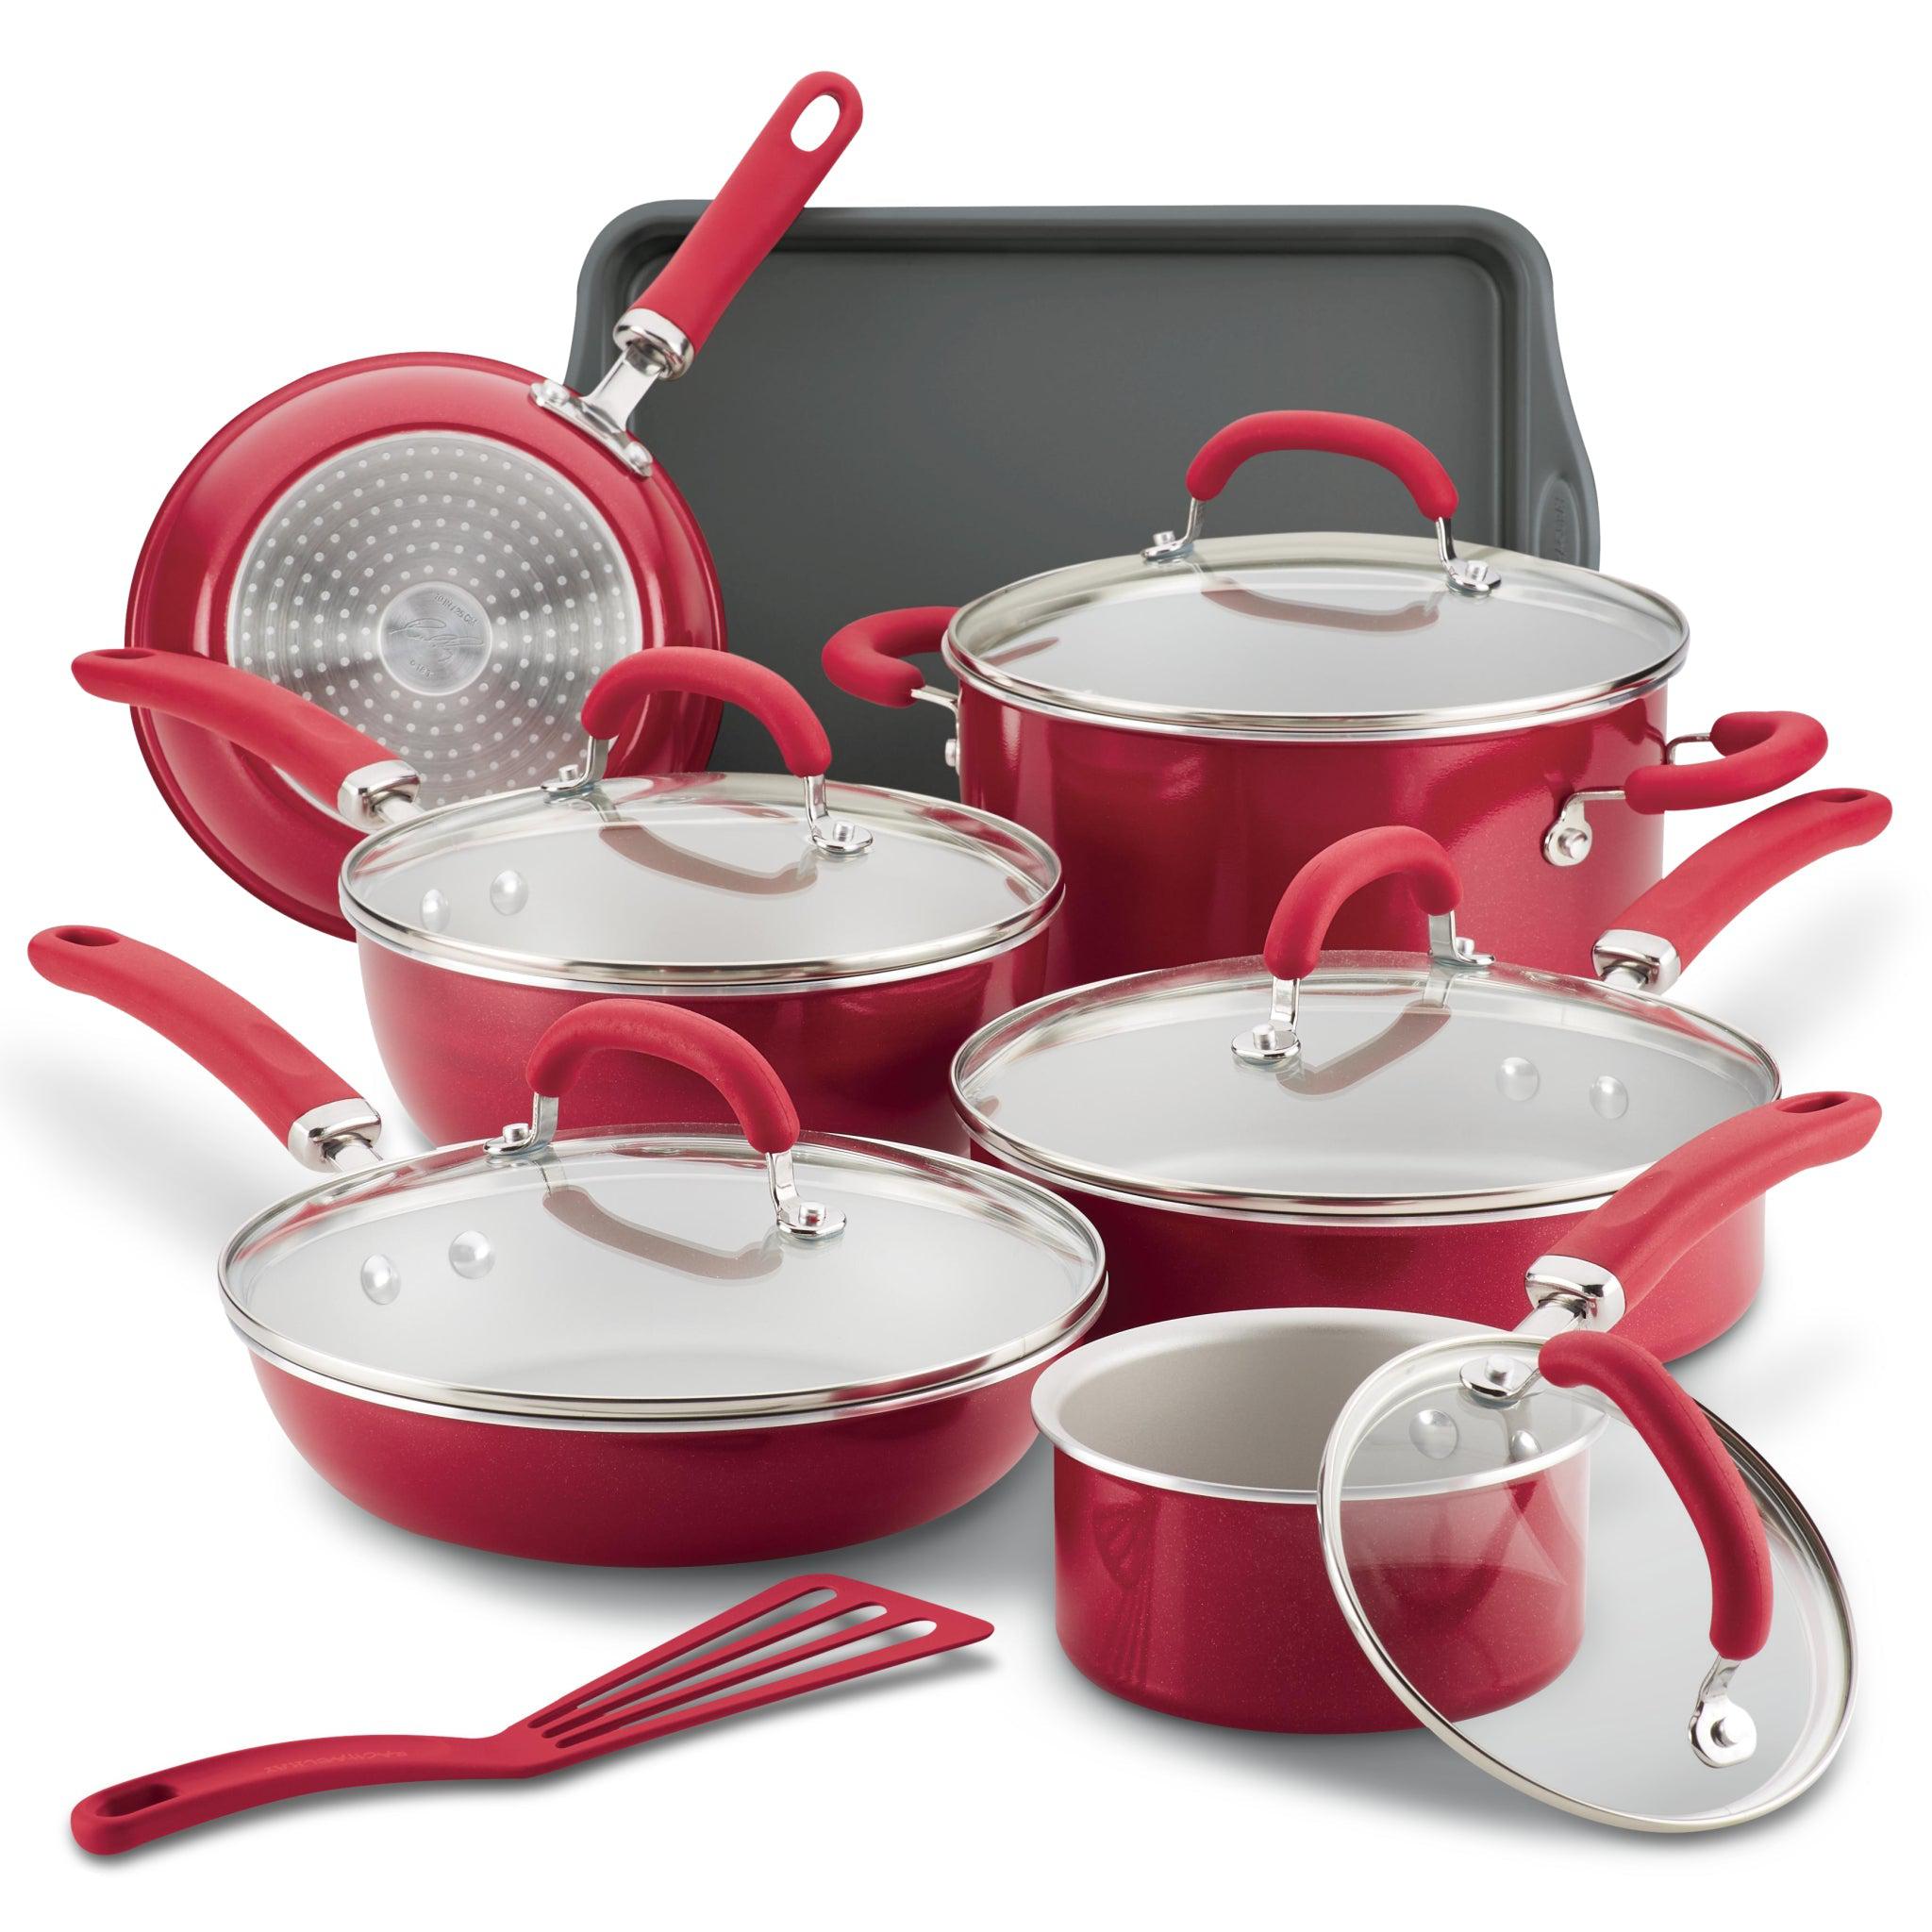 NEW 9-Piece Simple Cooking Nonstick Cookware Set (Red)